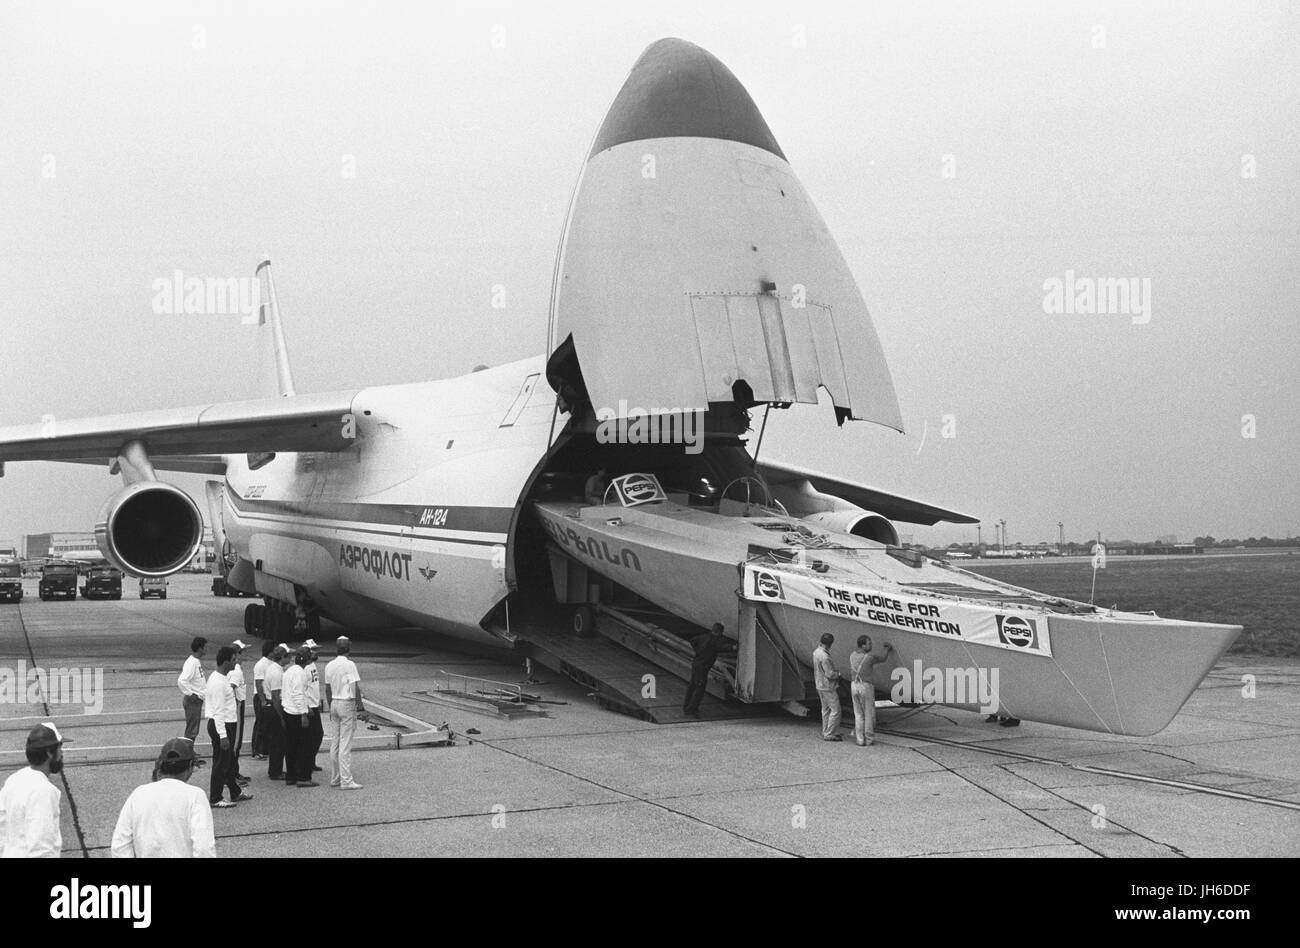 Russia's first Whitbread Round The World Yacht Race entry is unloaded at Heathrow Airport. The 25 metres, 6.8 tonne, 16-man crew yacht, 'Pepsi Fazisi', arrived aboard an Aeroflot Antonov 124 - one of the world's largest jets. Stock Photo